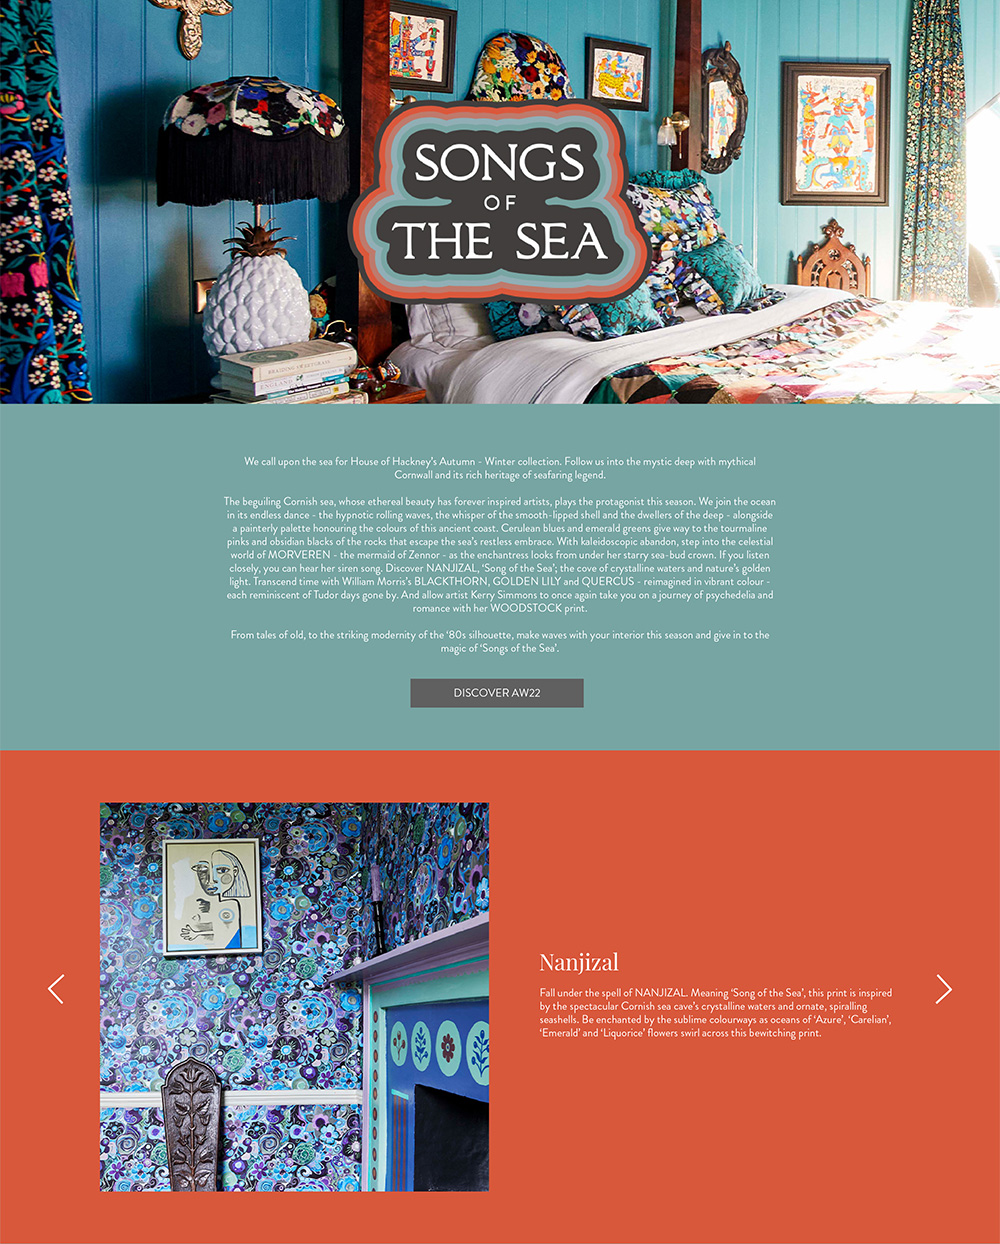 SONGS-OF-THE-SEA_CAMPAIGN_HOUSE-OF-HACKNEY_DIGITAL-DESIGN_1-1